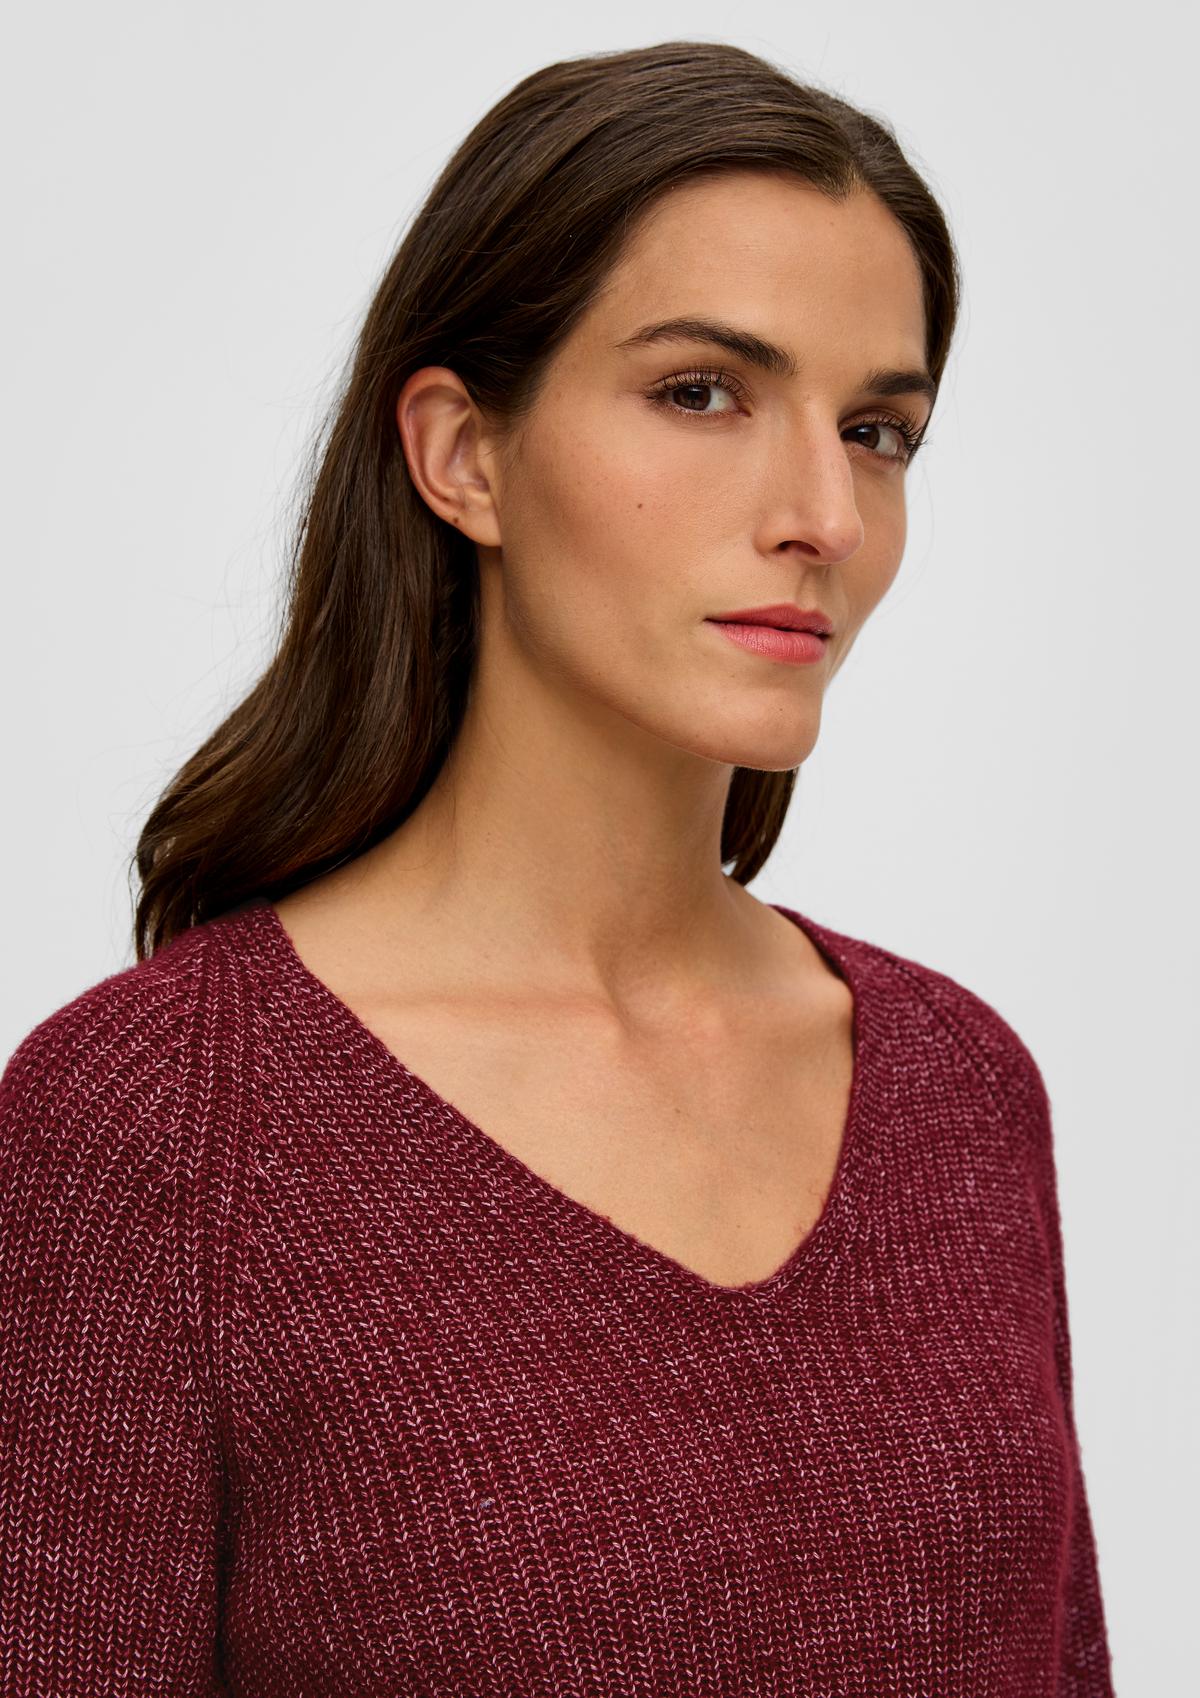 s.Oliver Knitted jumper with a ribbed texture